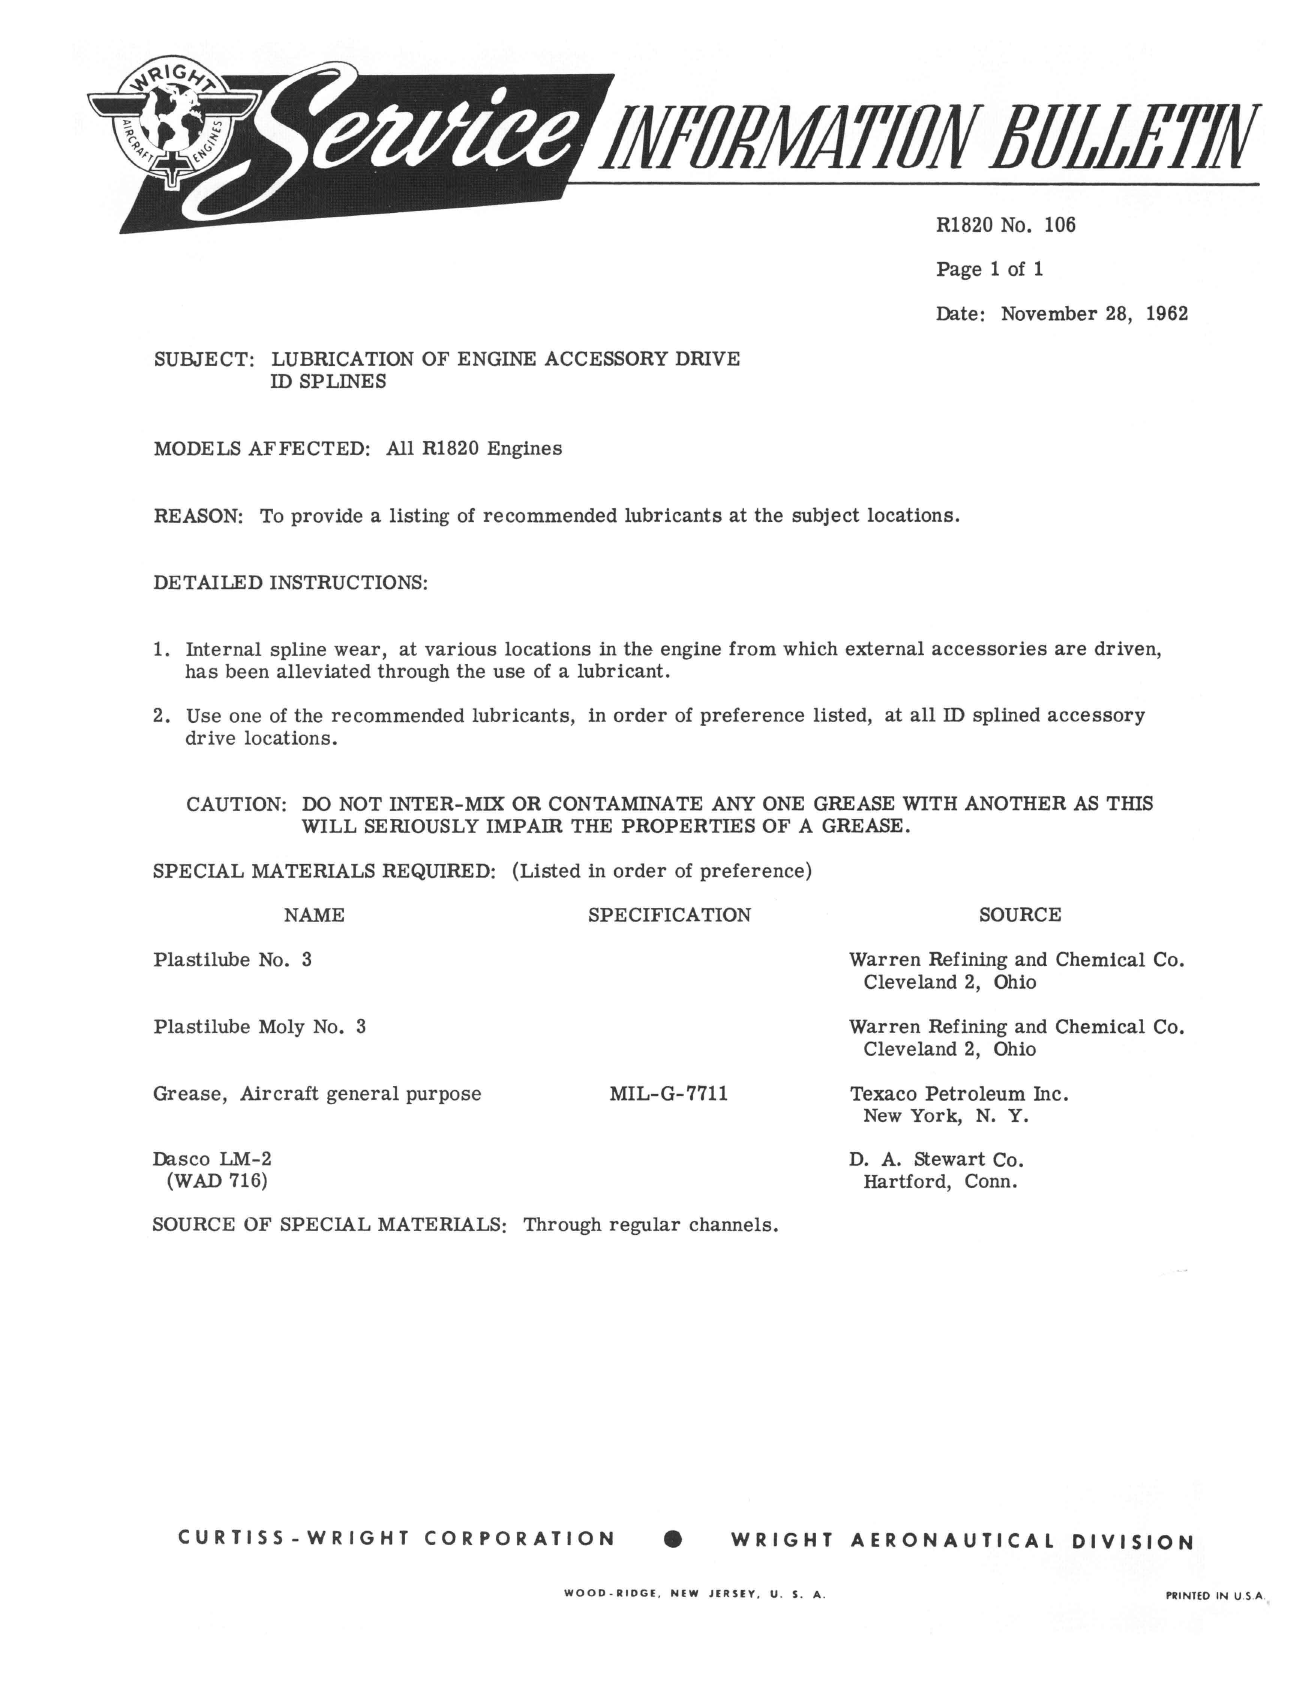 Sample page 1 from AirCorps Library document: Lubrication of Engine Accessory Drive ID Splines